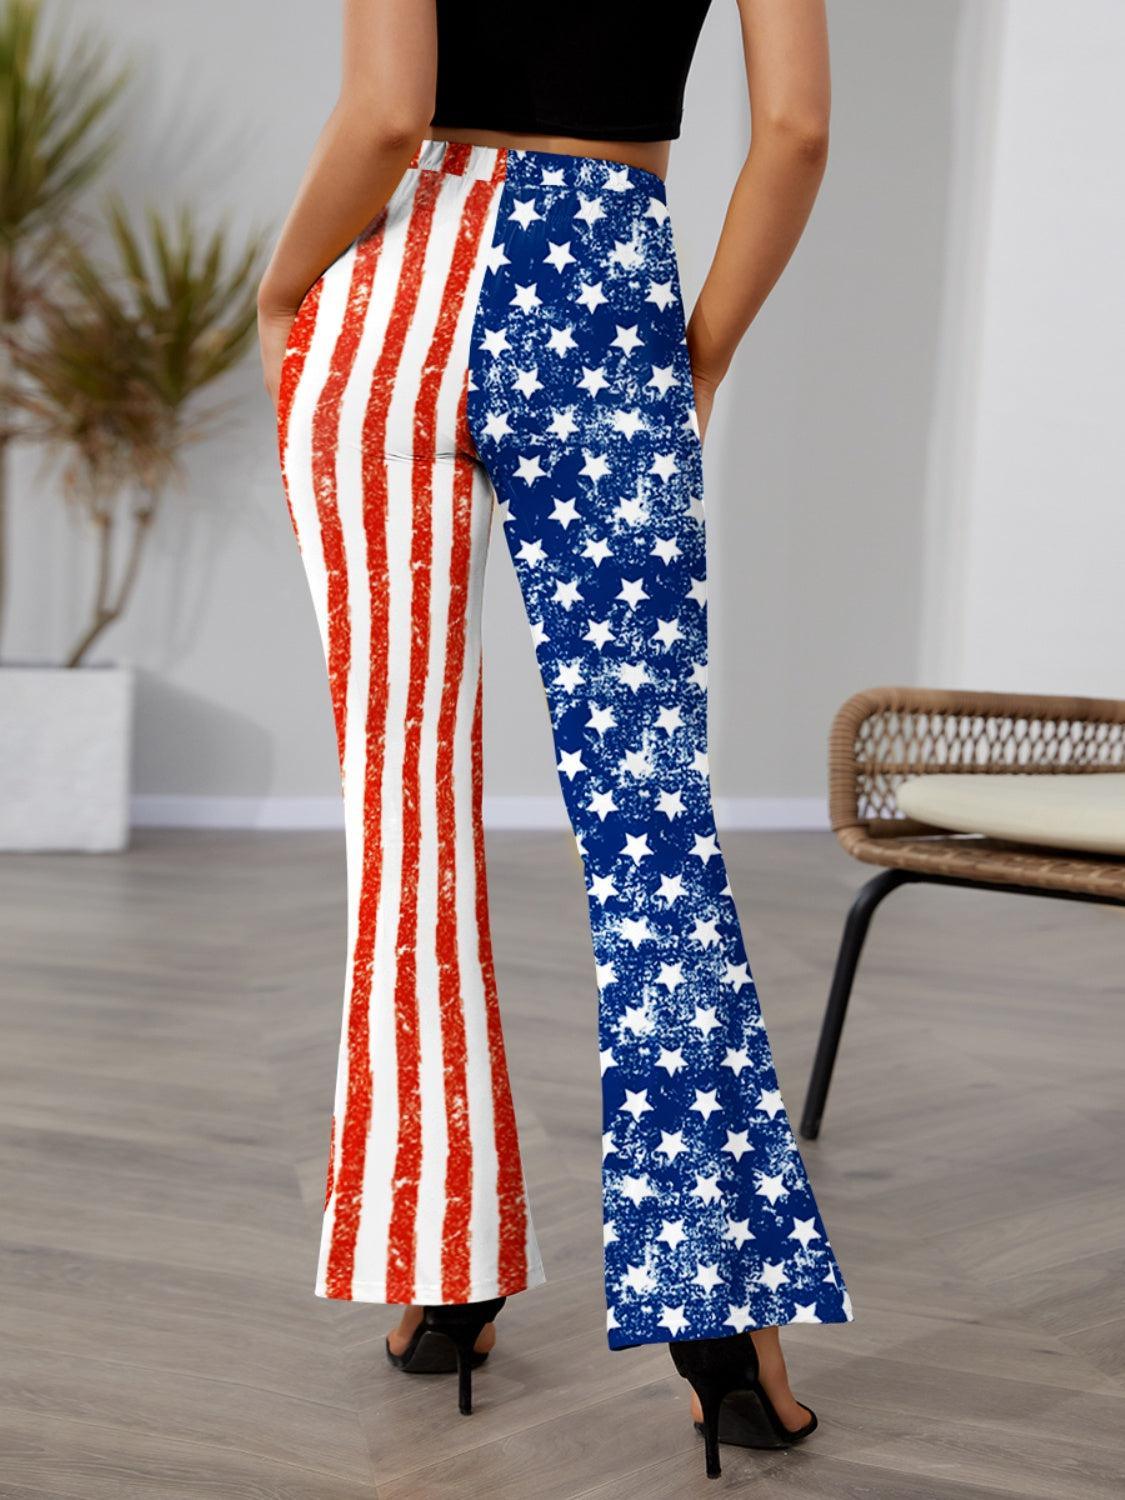 a woman in a black top and red, white, and blue american flag pants